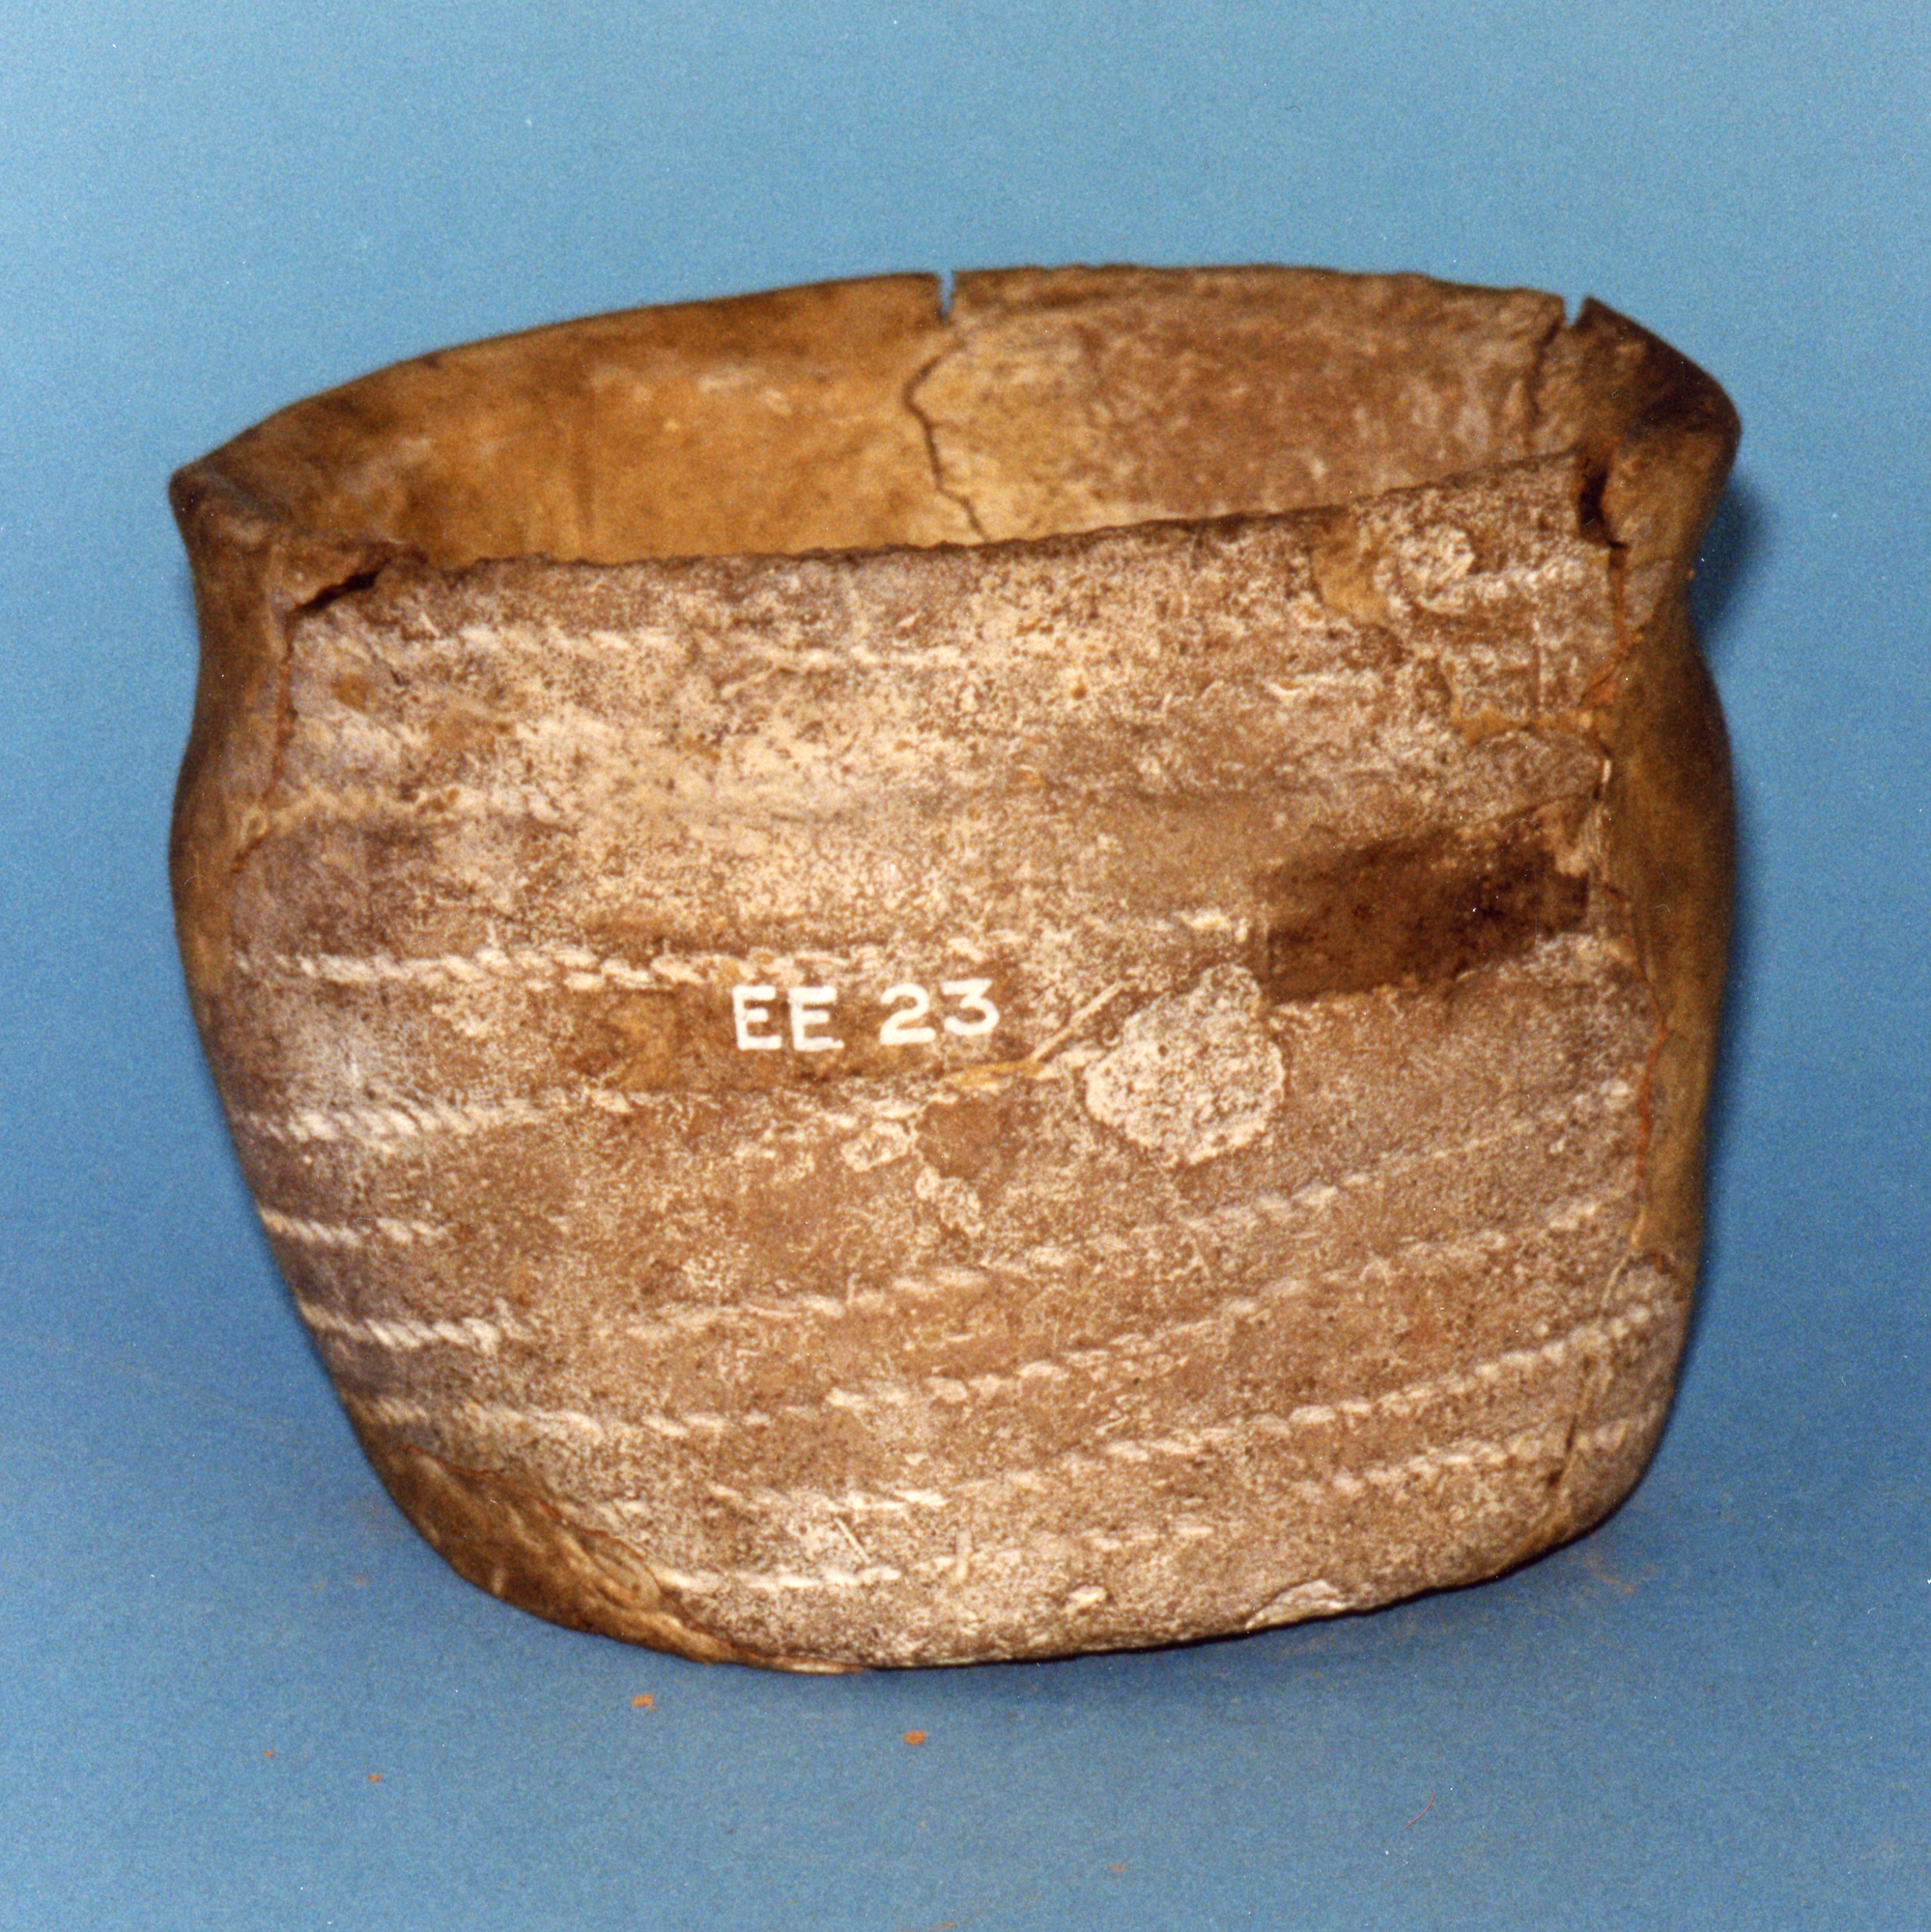 Image of Pottery food vessel from Cairn Curr, Alford © National Museums Scotland